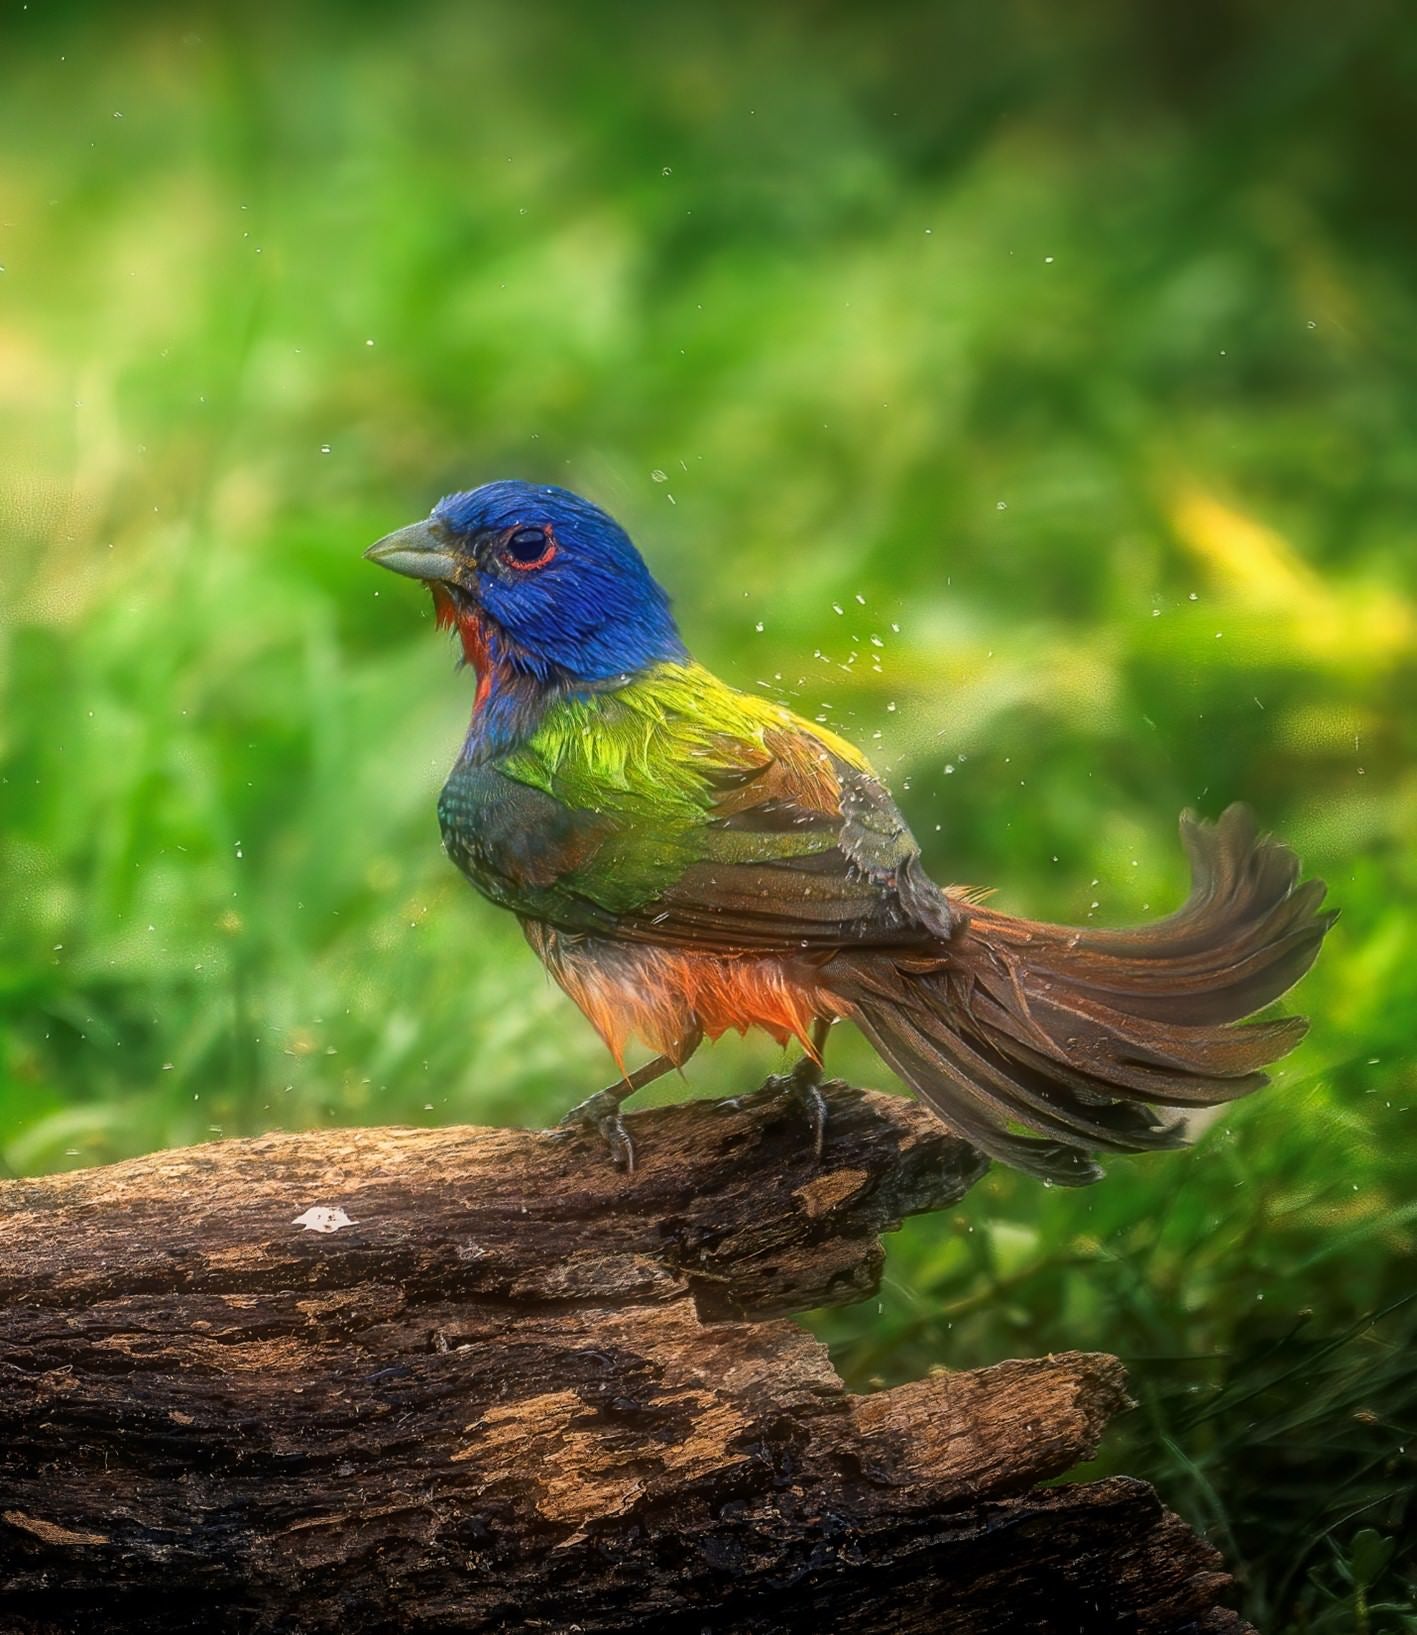 “A Painted Bunting indulges in a refreshing bath – a vibrant watercolor masterpiece.” Photo by Raj Bose. Sony Alpha 1. Sony 100-400mm f/4.5-5.6. 1/2500-sec., f/5.6, ISO 2500